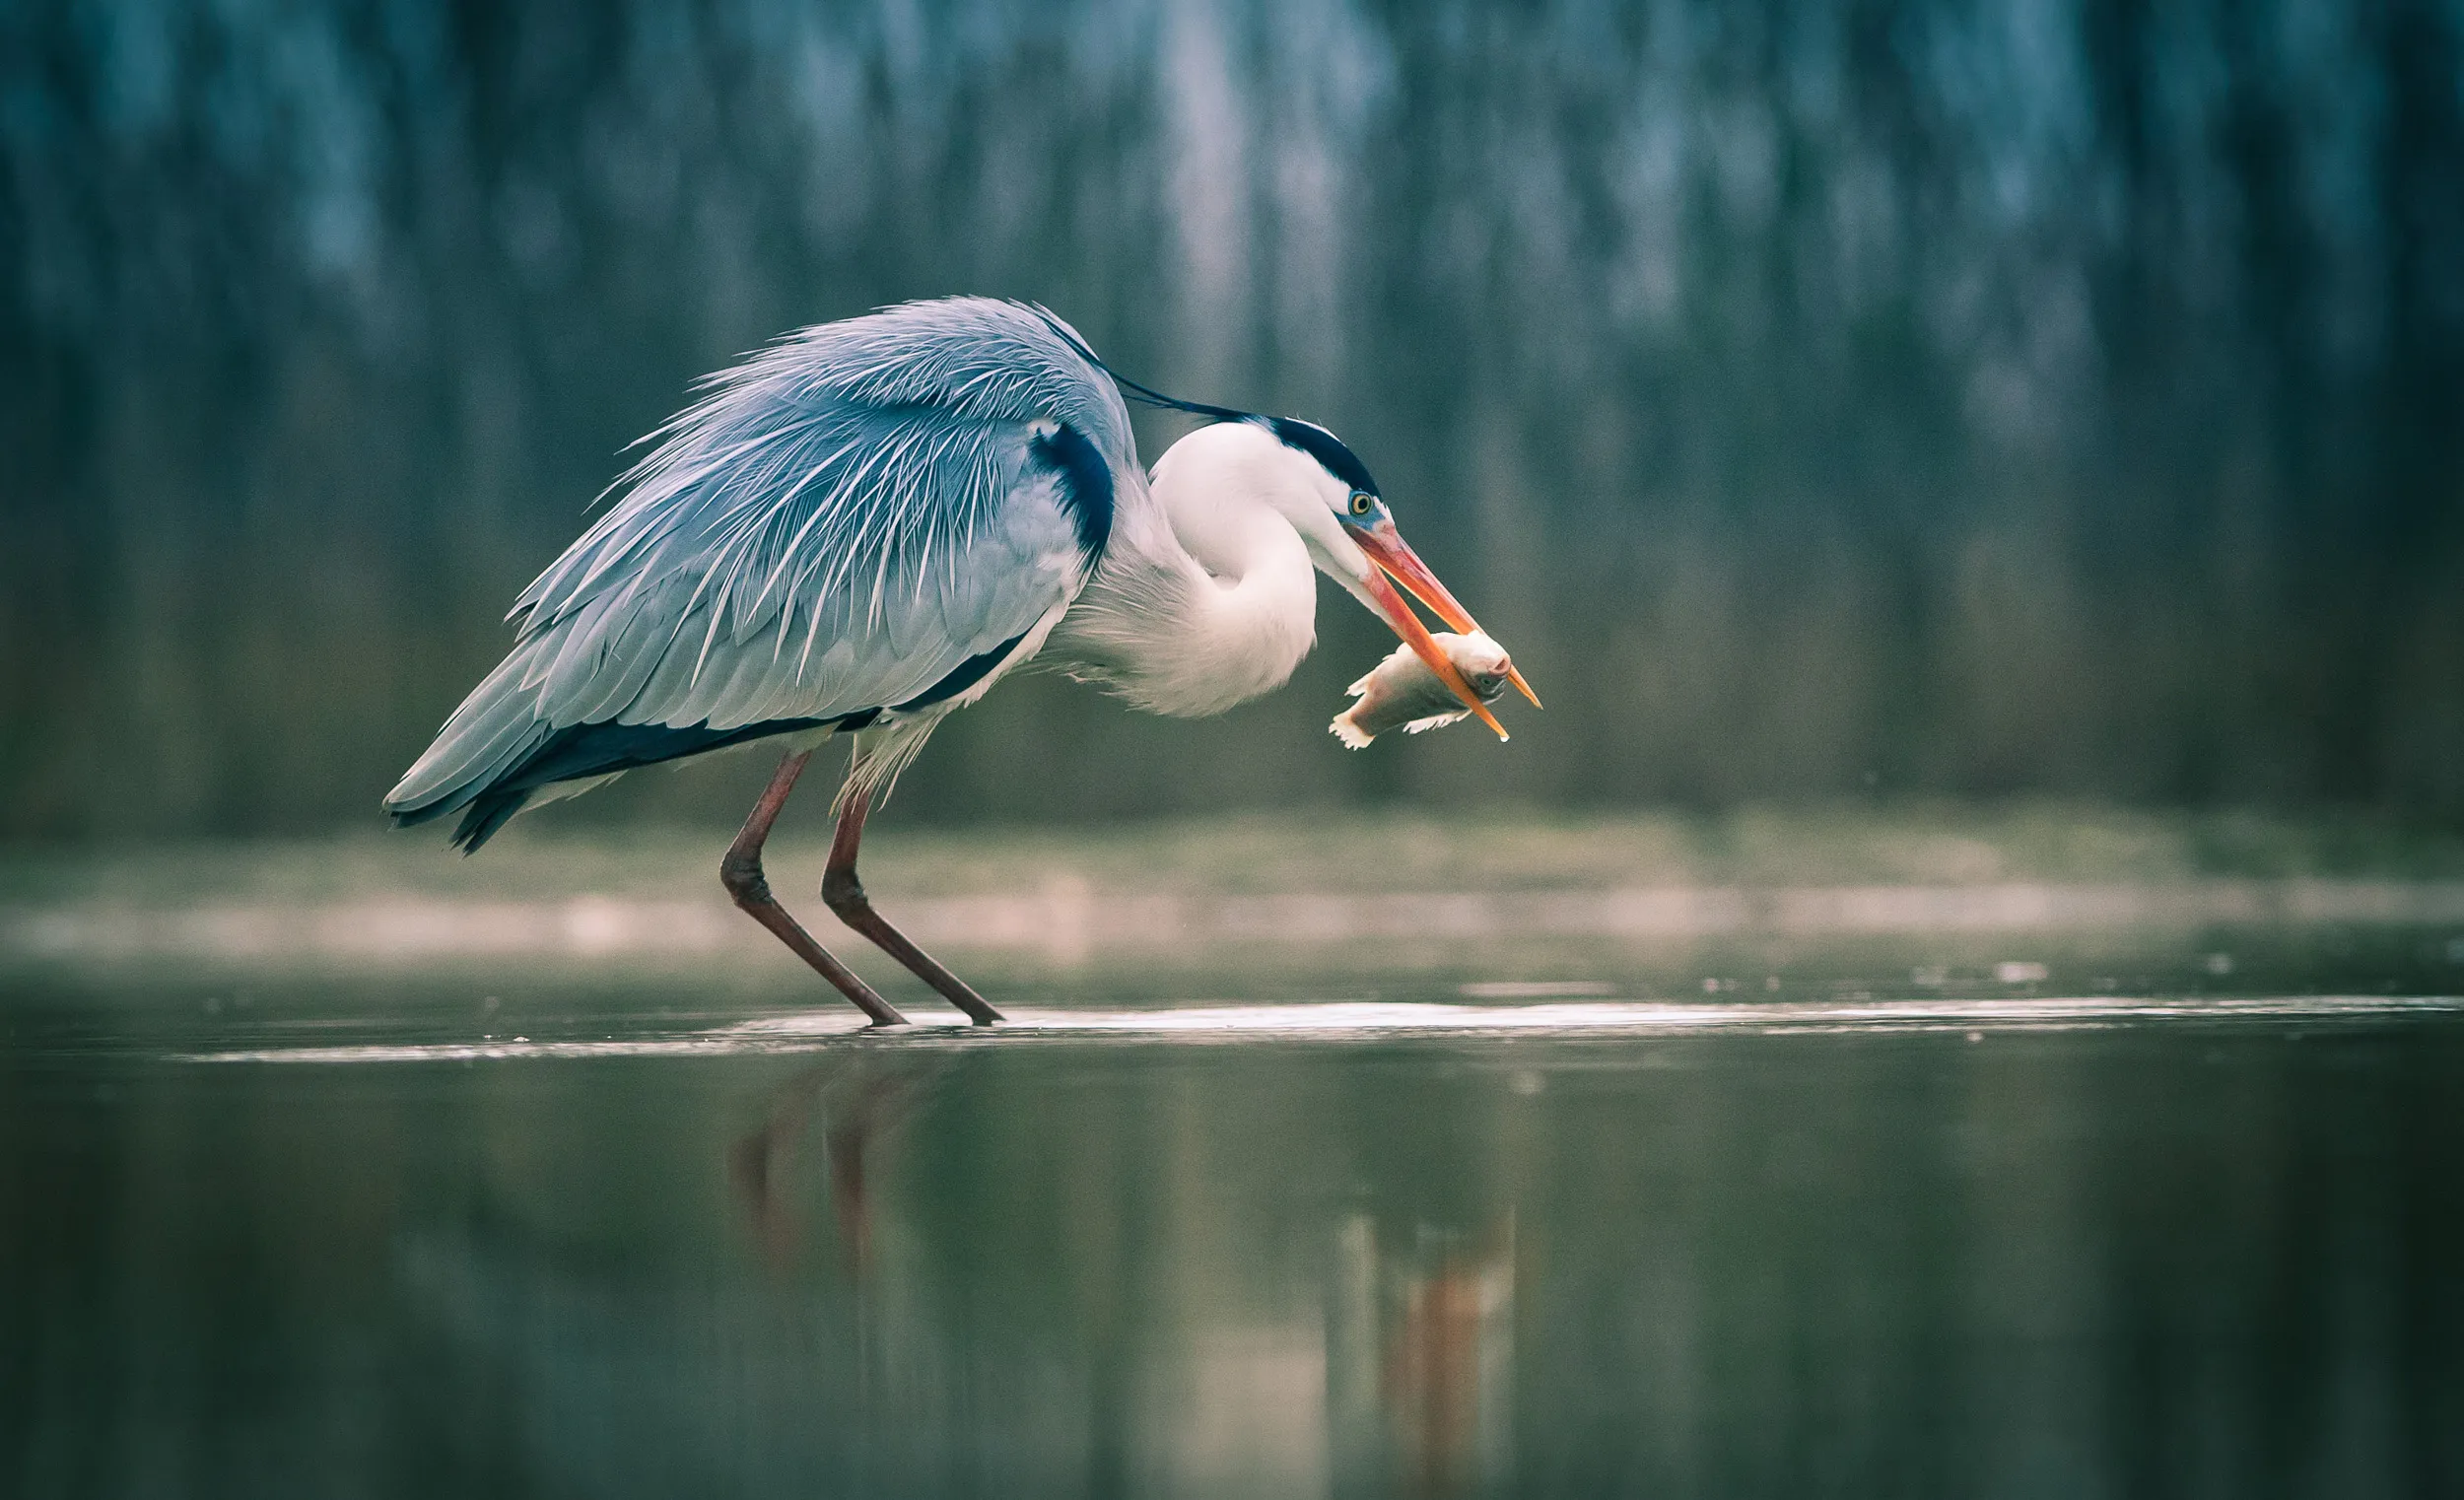 Grey Heron, stood in shallow water, eating a fish